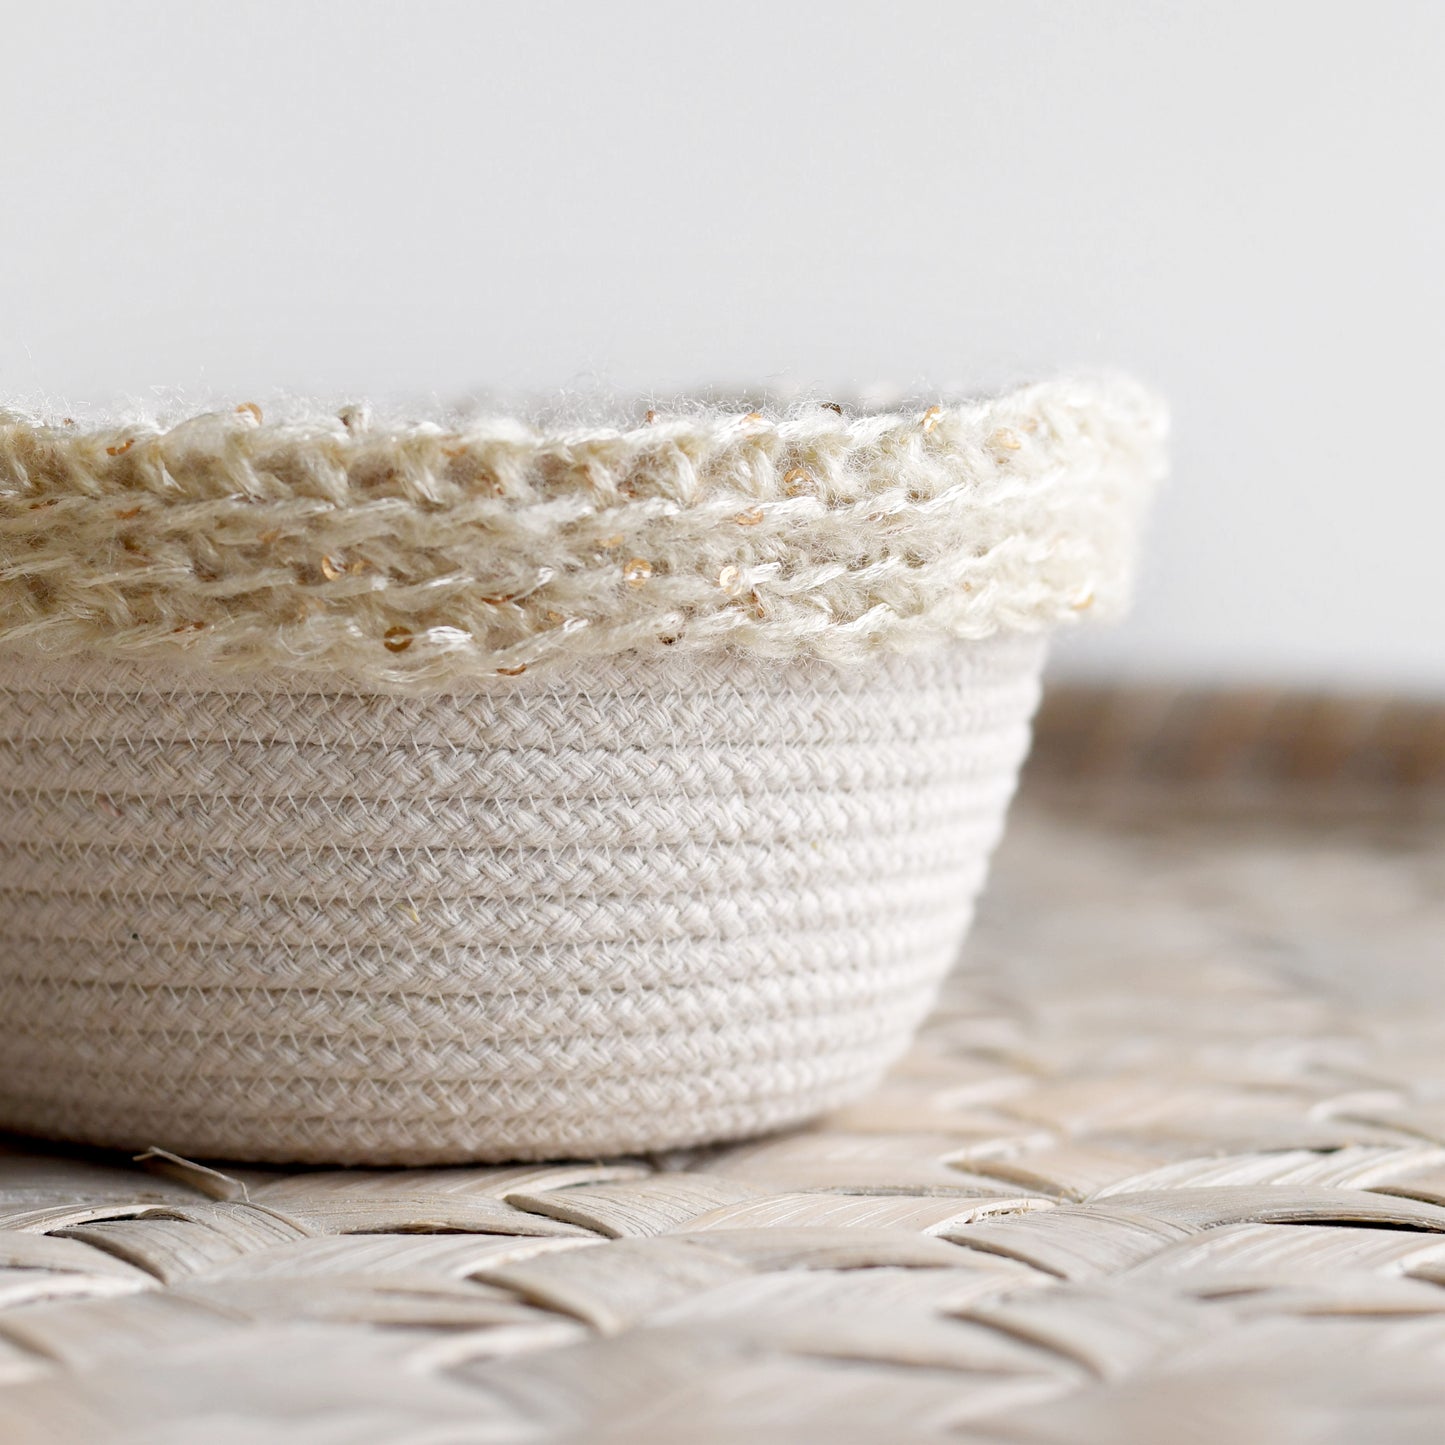 Rope basket with crochet trim